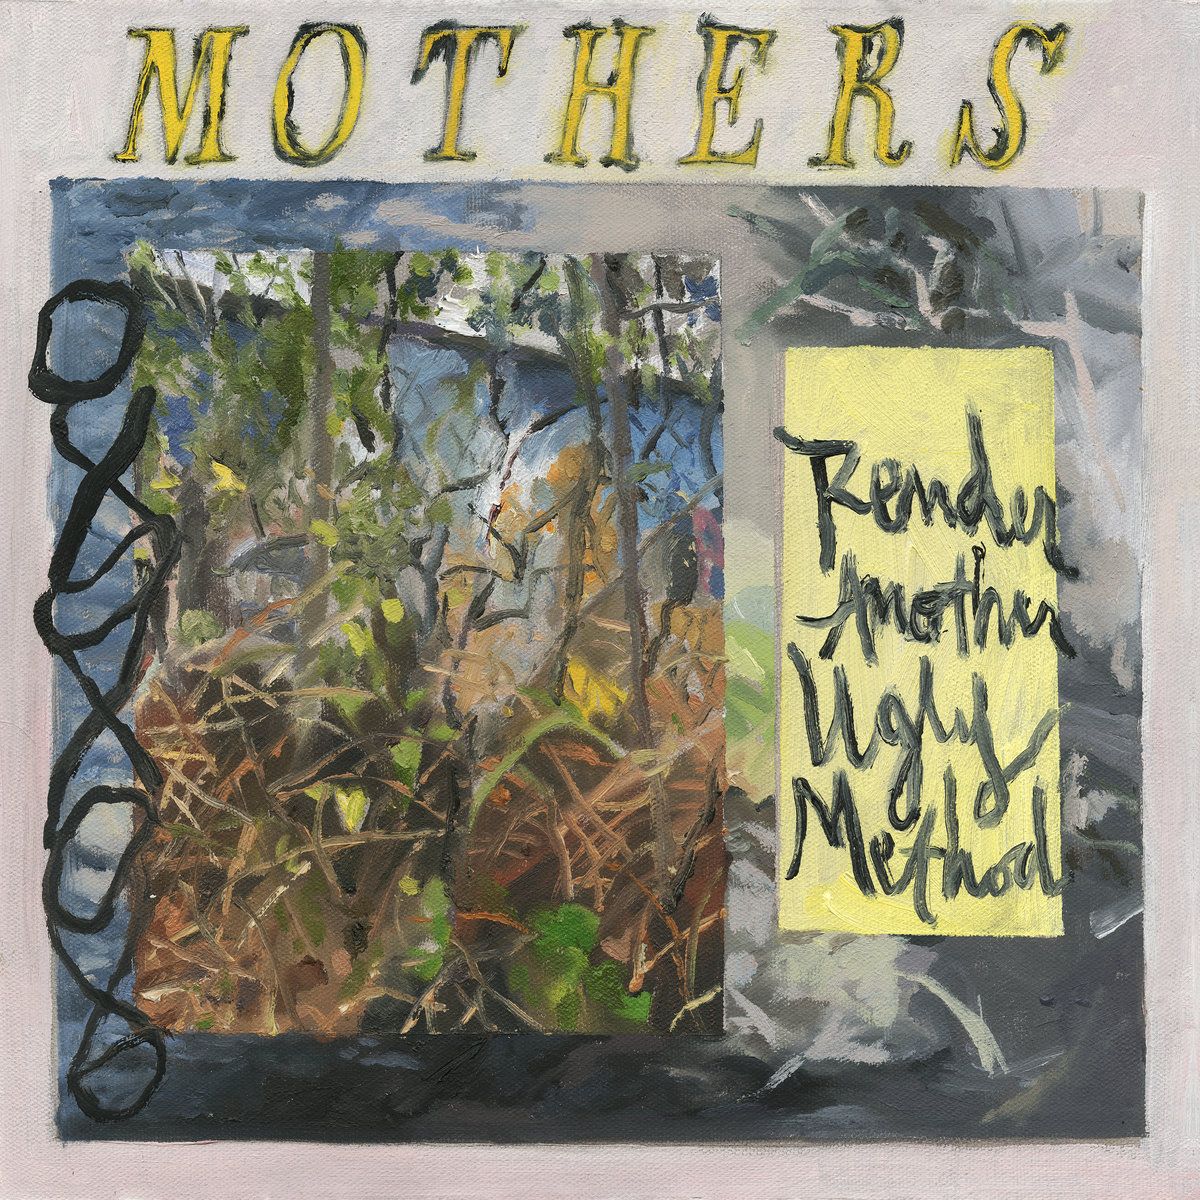 Mothers show considerable growth on their second LP